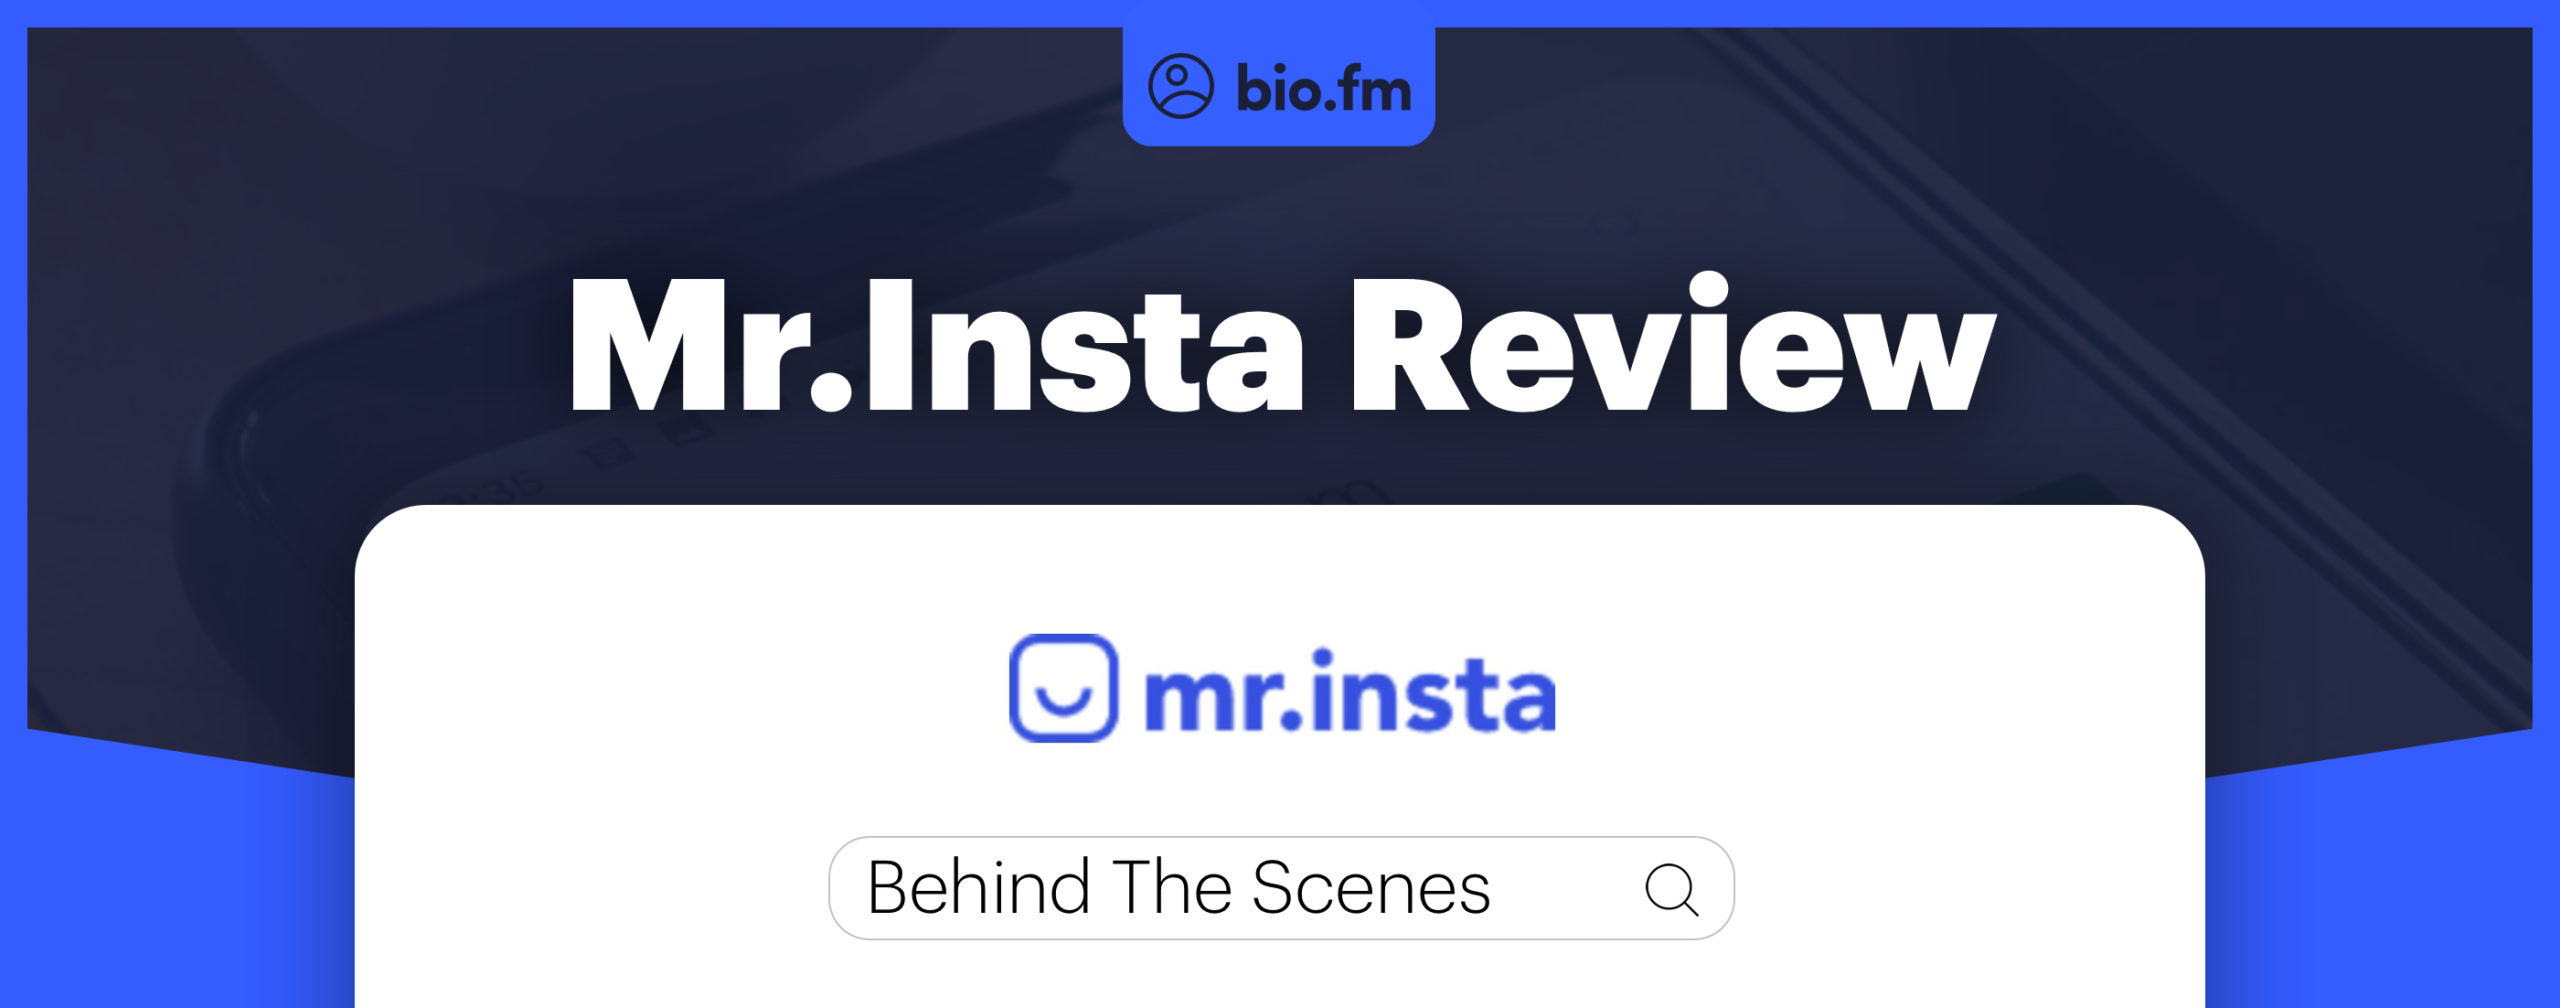 mr insta review featured image